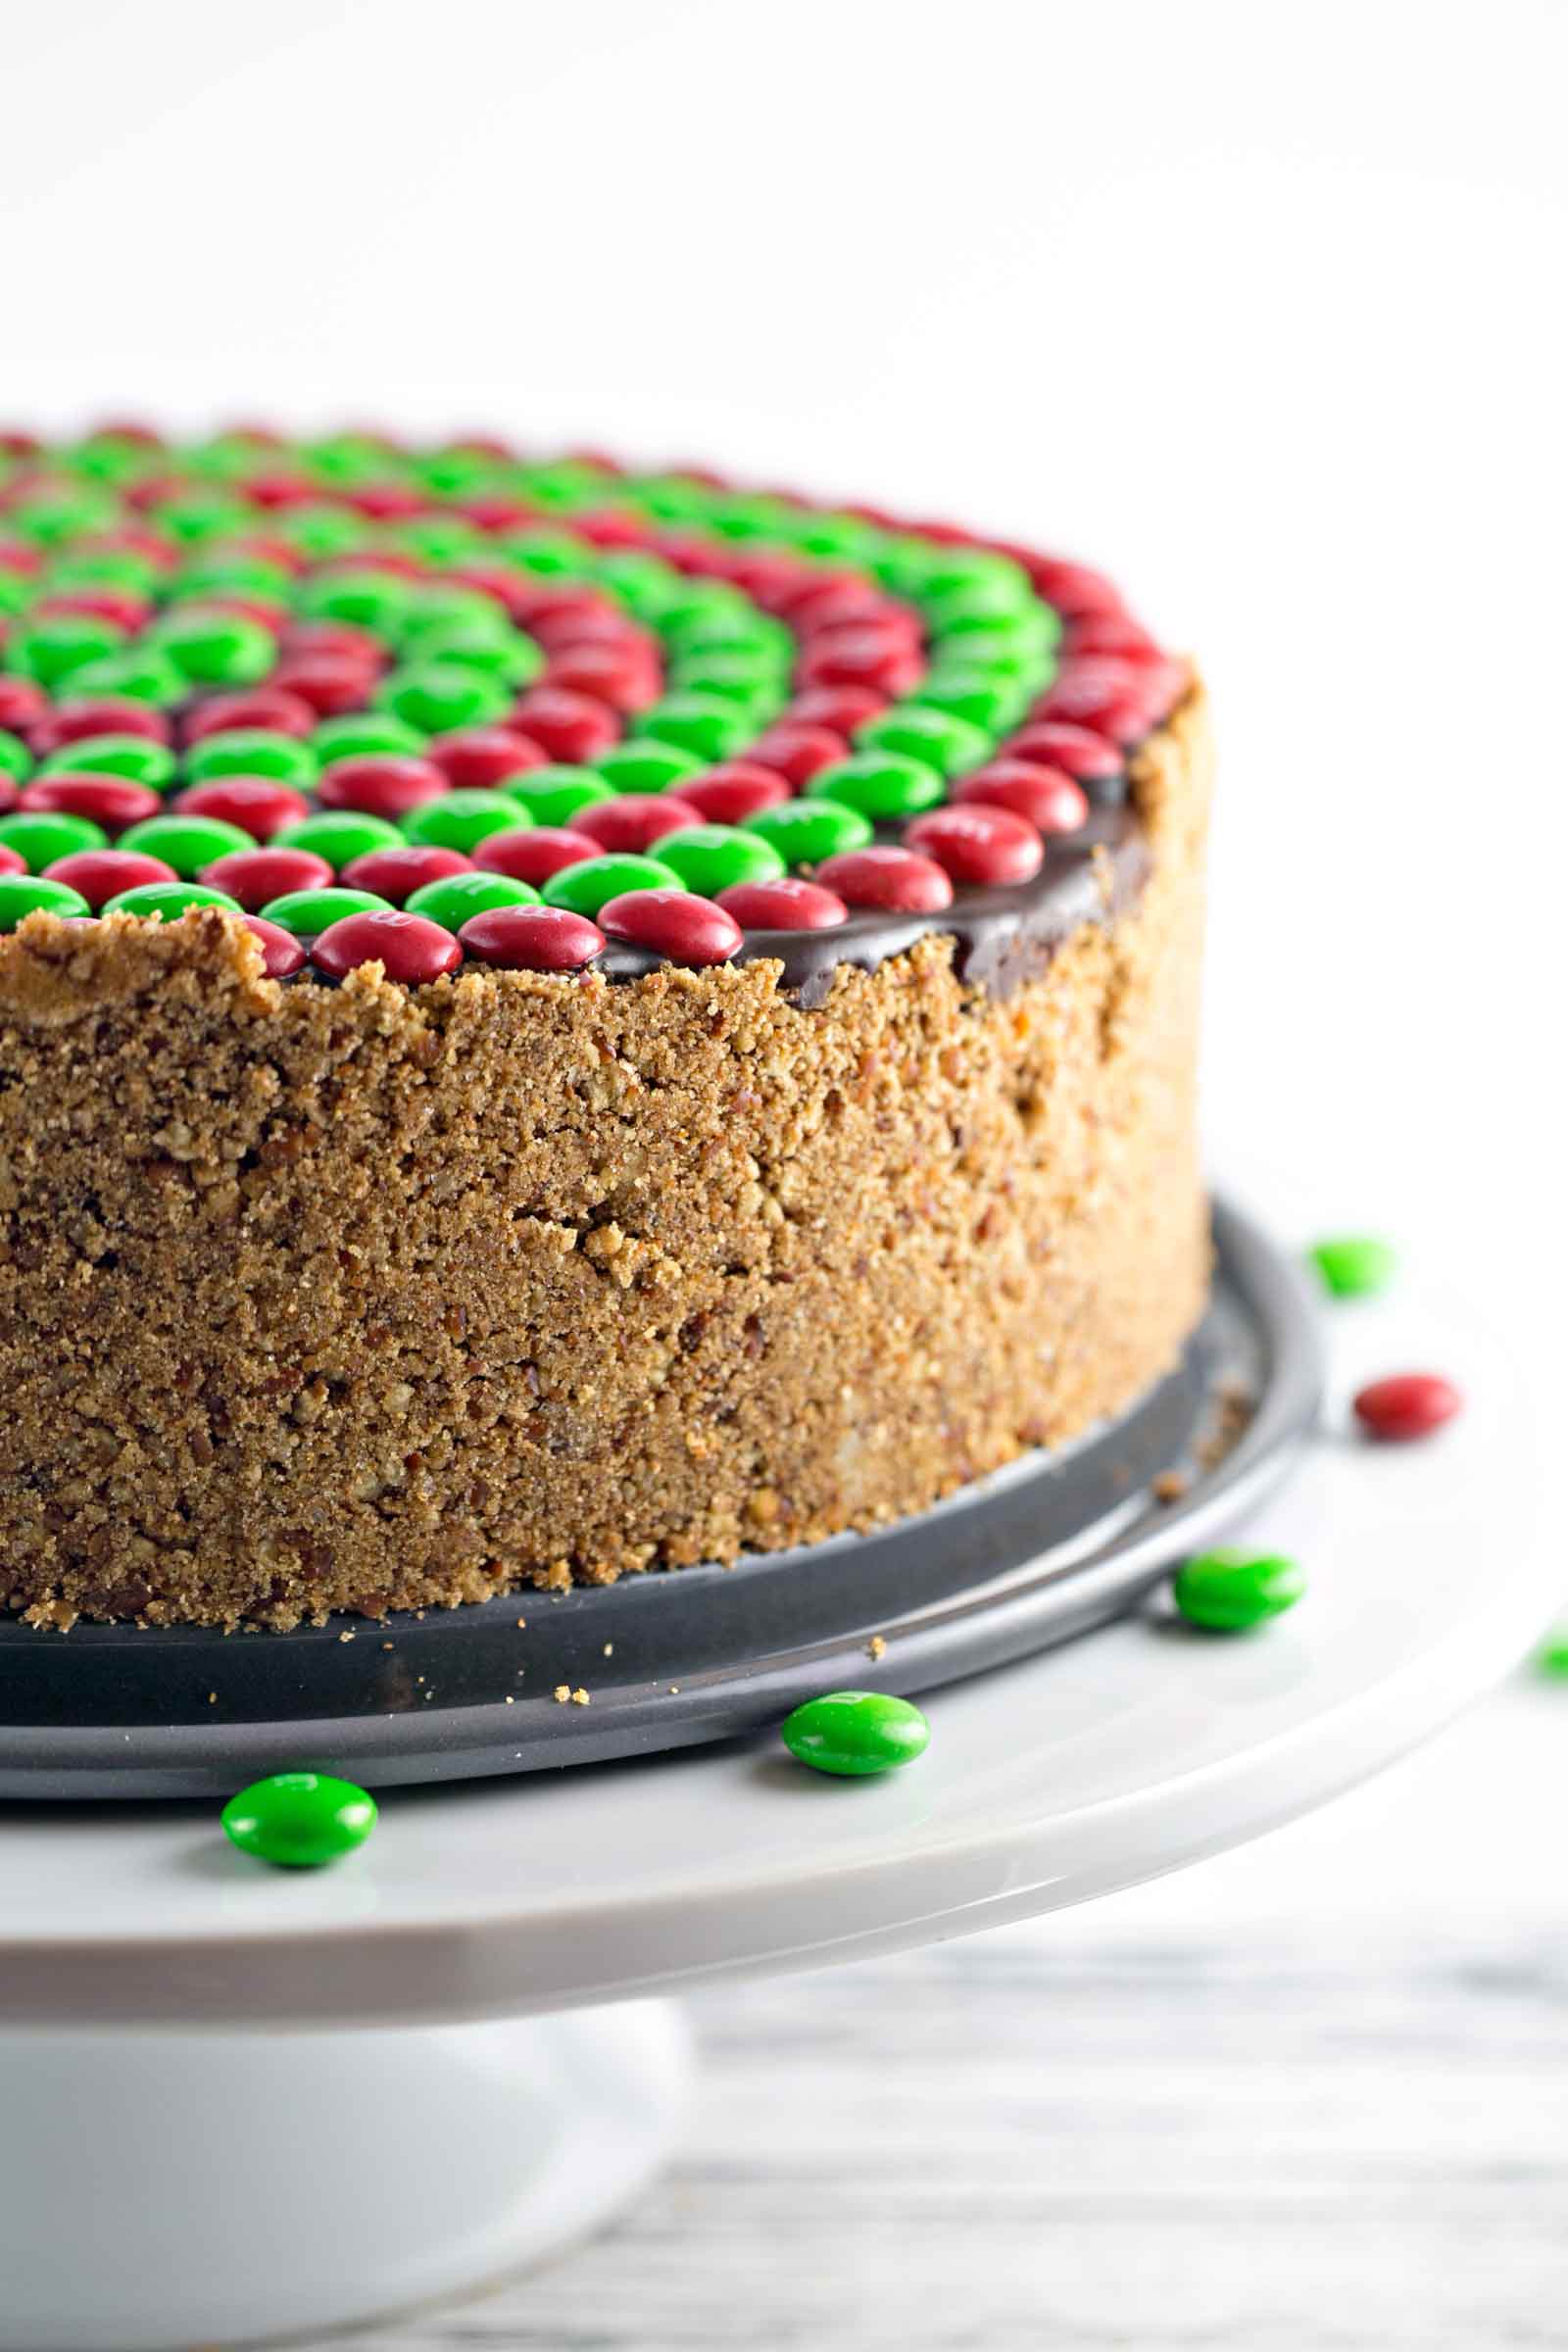 No Bake M&M’S® Pretzel Peanut Butter Pie: salty, crispy pretzel crust, smooth whipped peanut butter filling, rich chocolate ganache, and crunchy M&Ms combine into the perfect easy pie. Perfect for holiday entertaining! {Bunsen Burner Bakery}